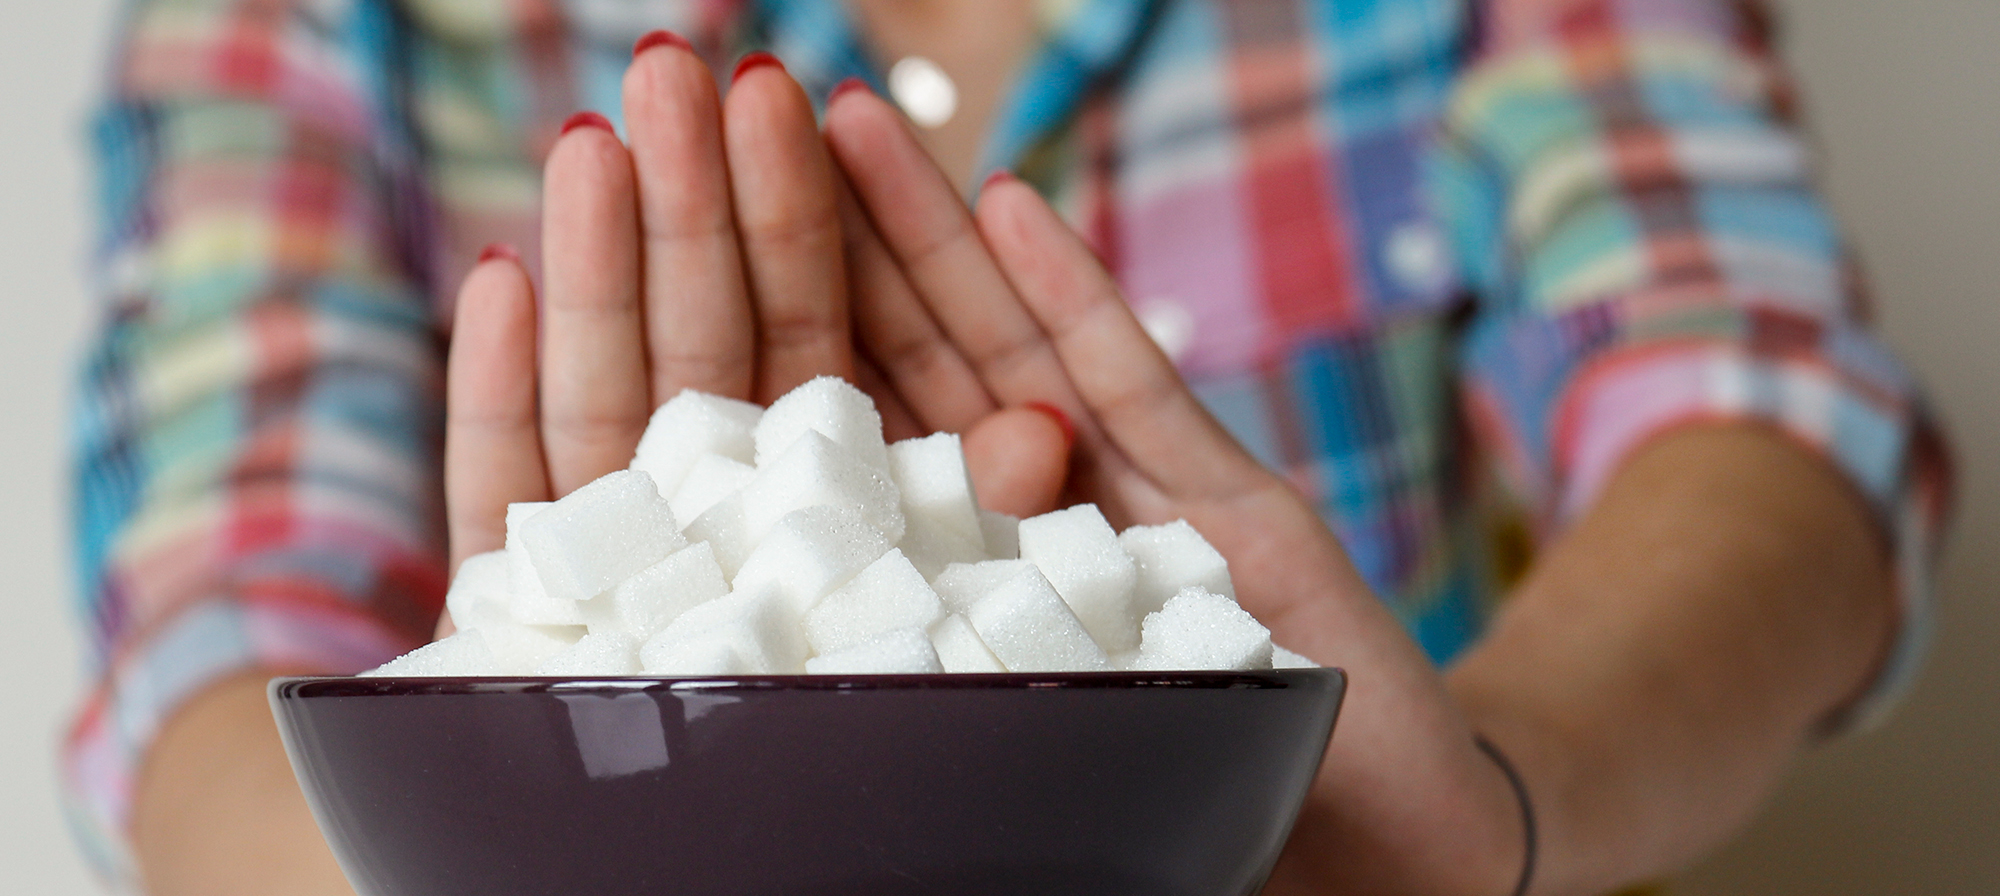 5 Tips to Help You Break Free From a Sugar Habit